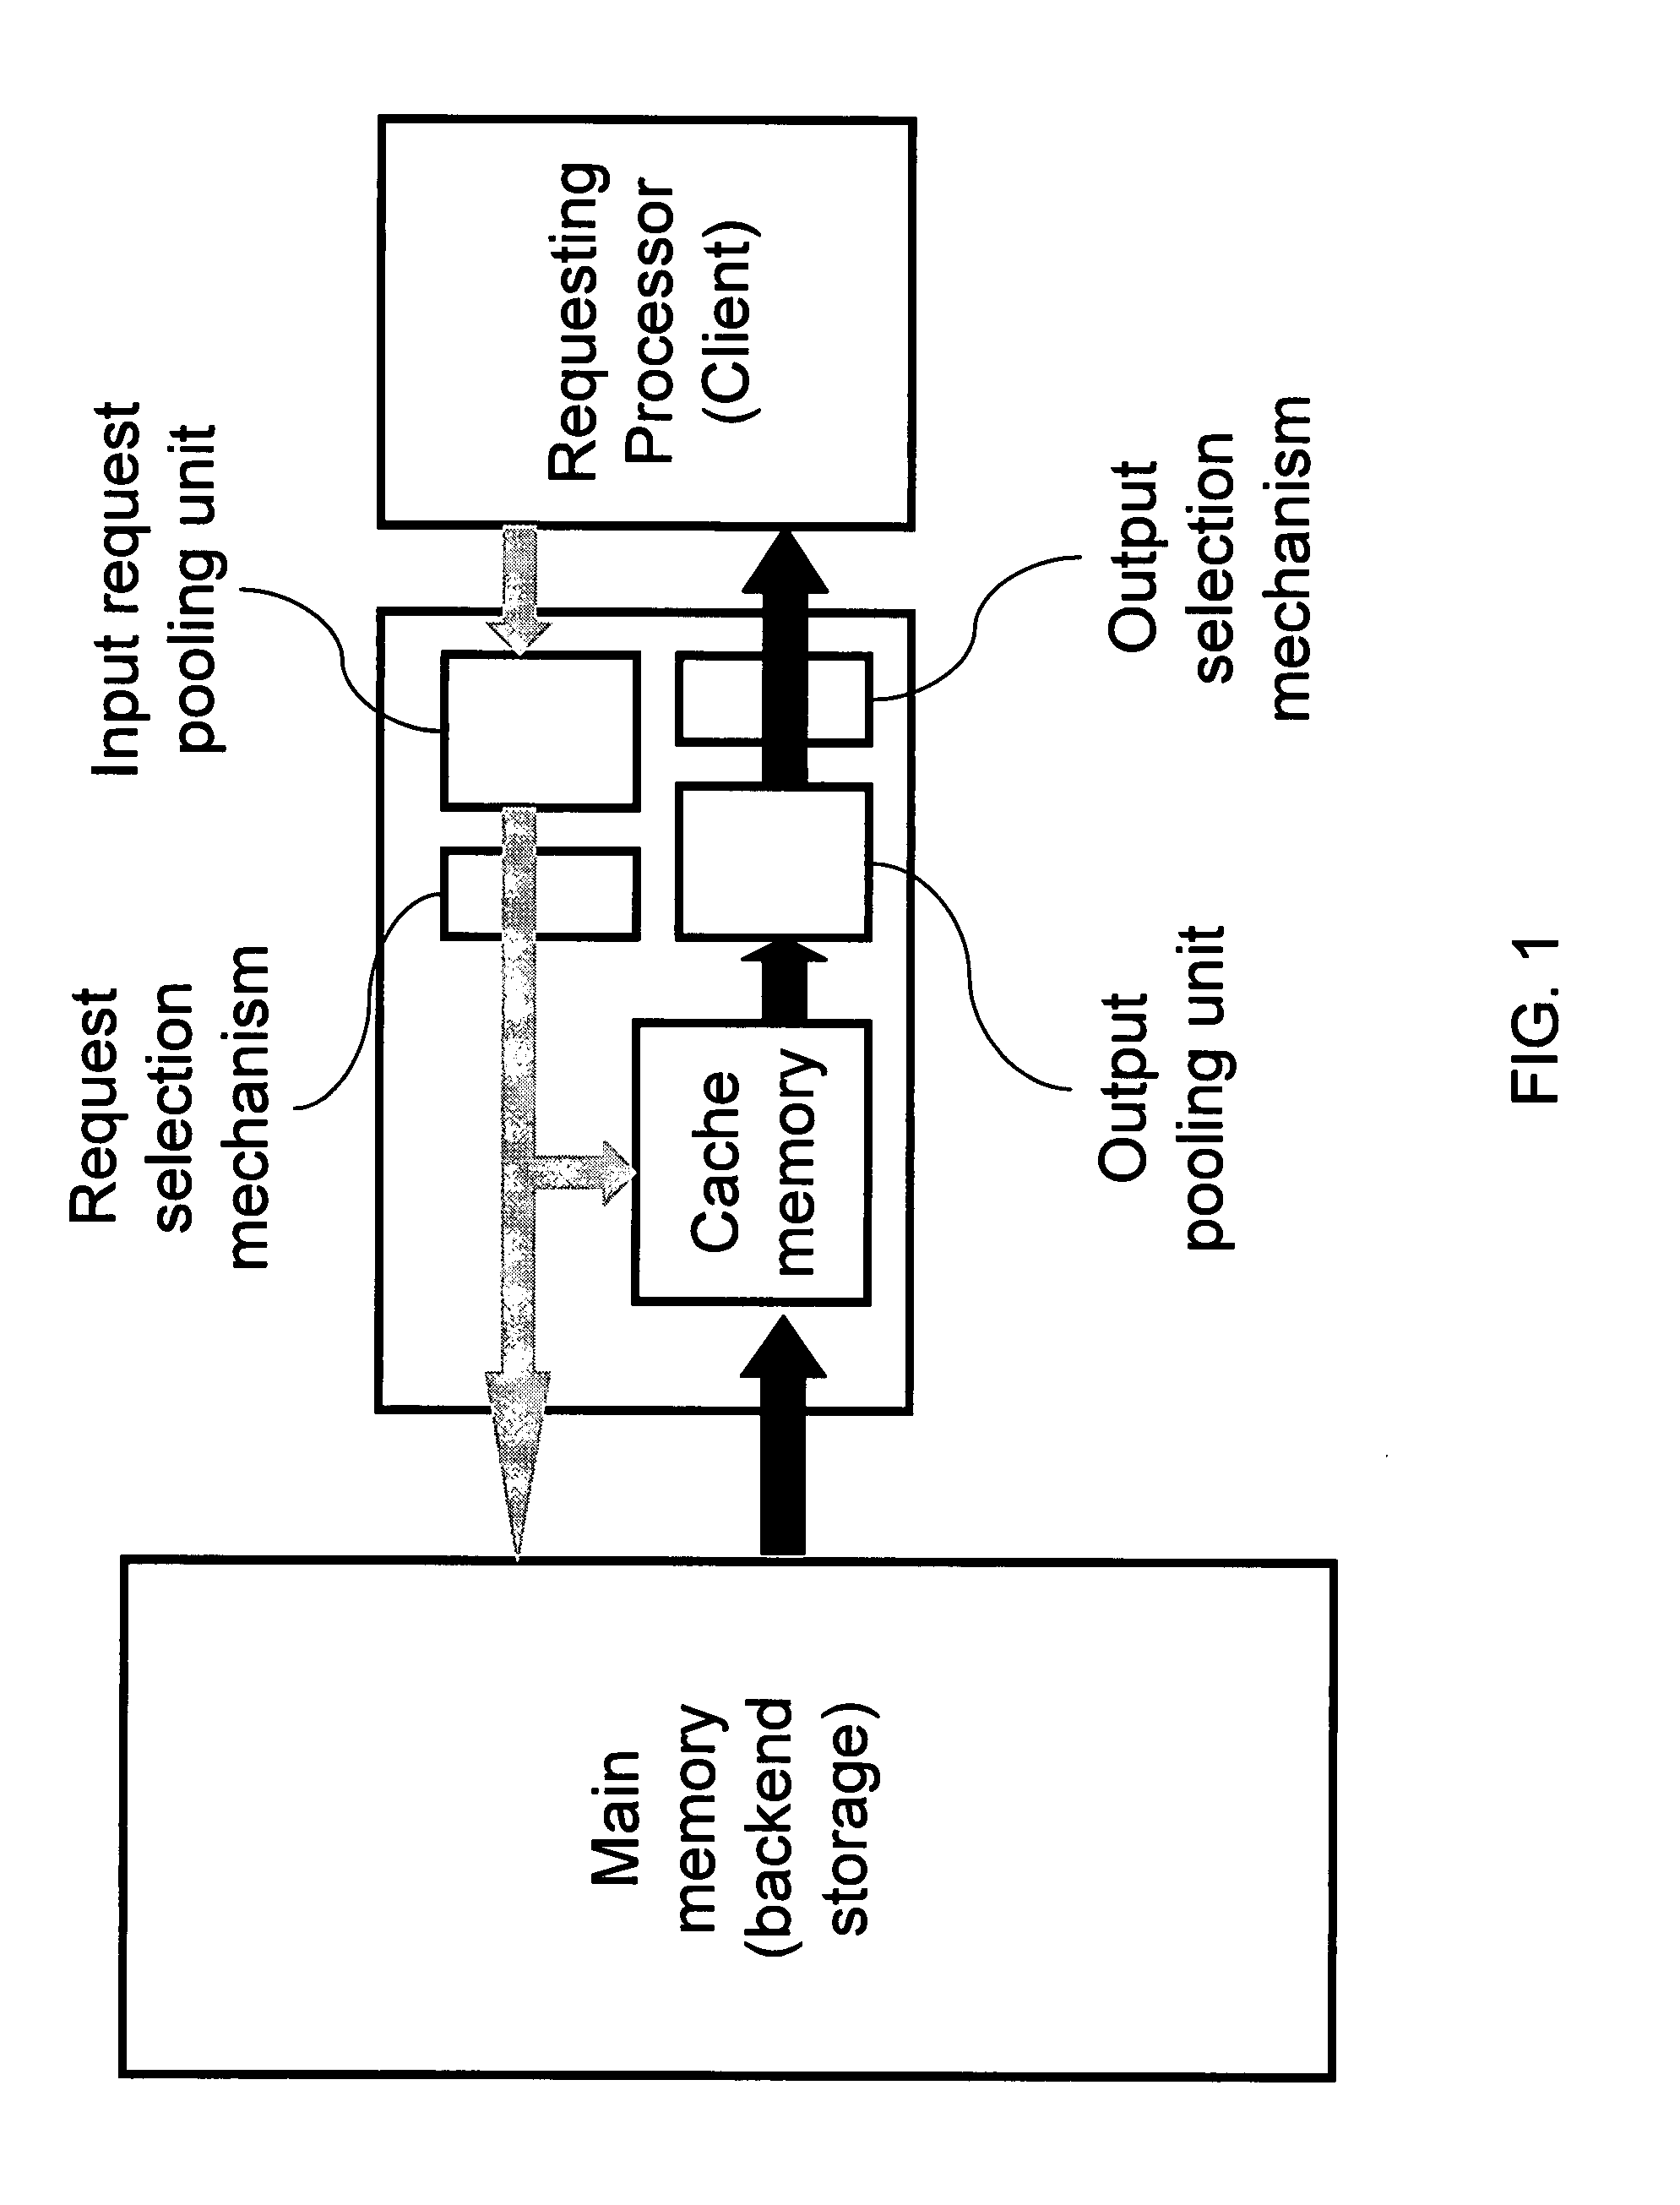 Apparatus and methods for optimization of image and motion picture memory access